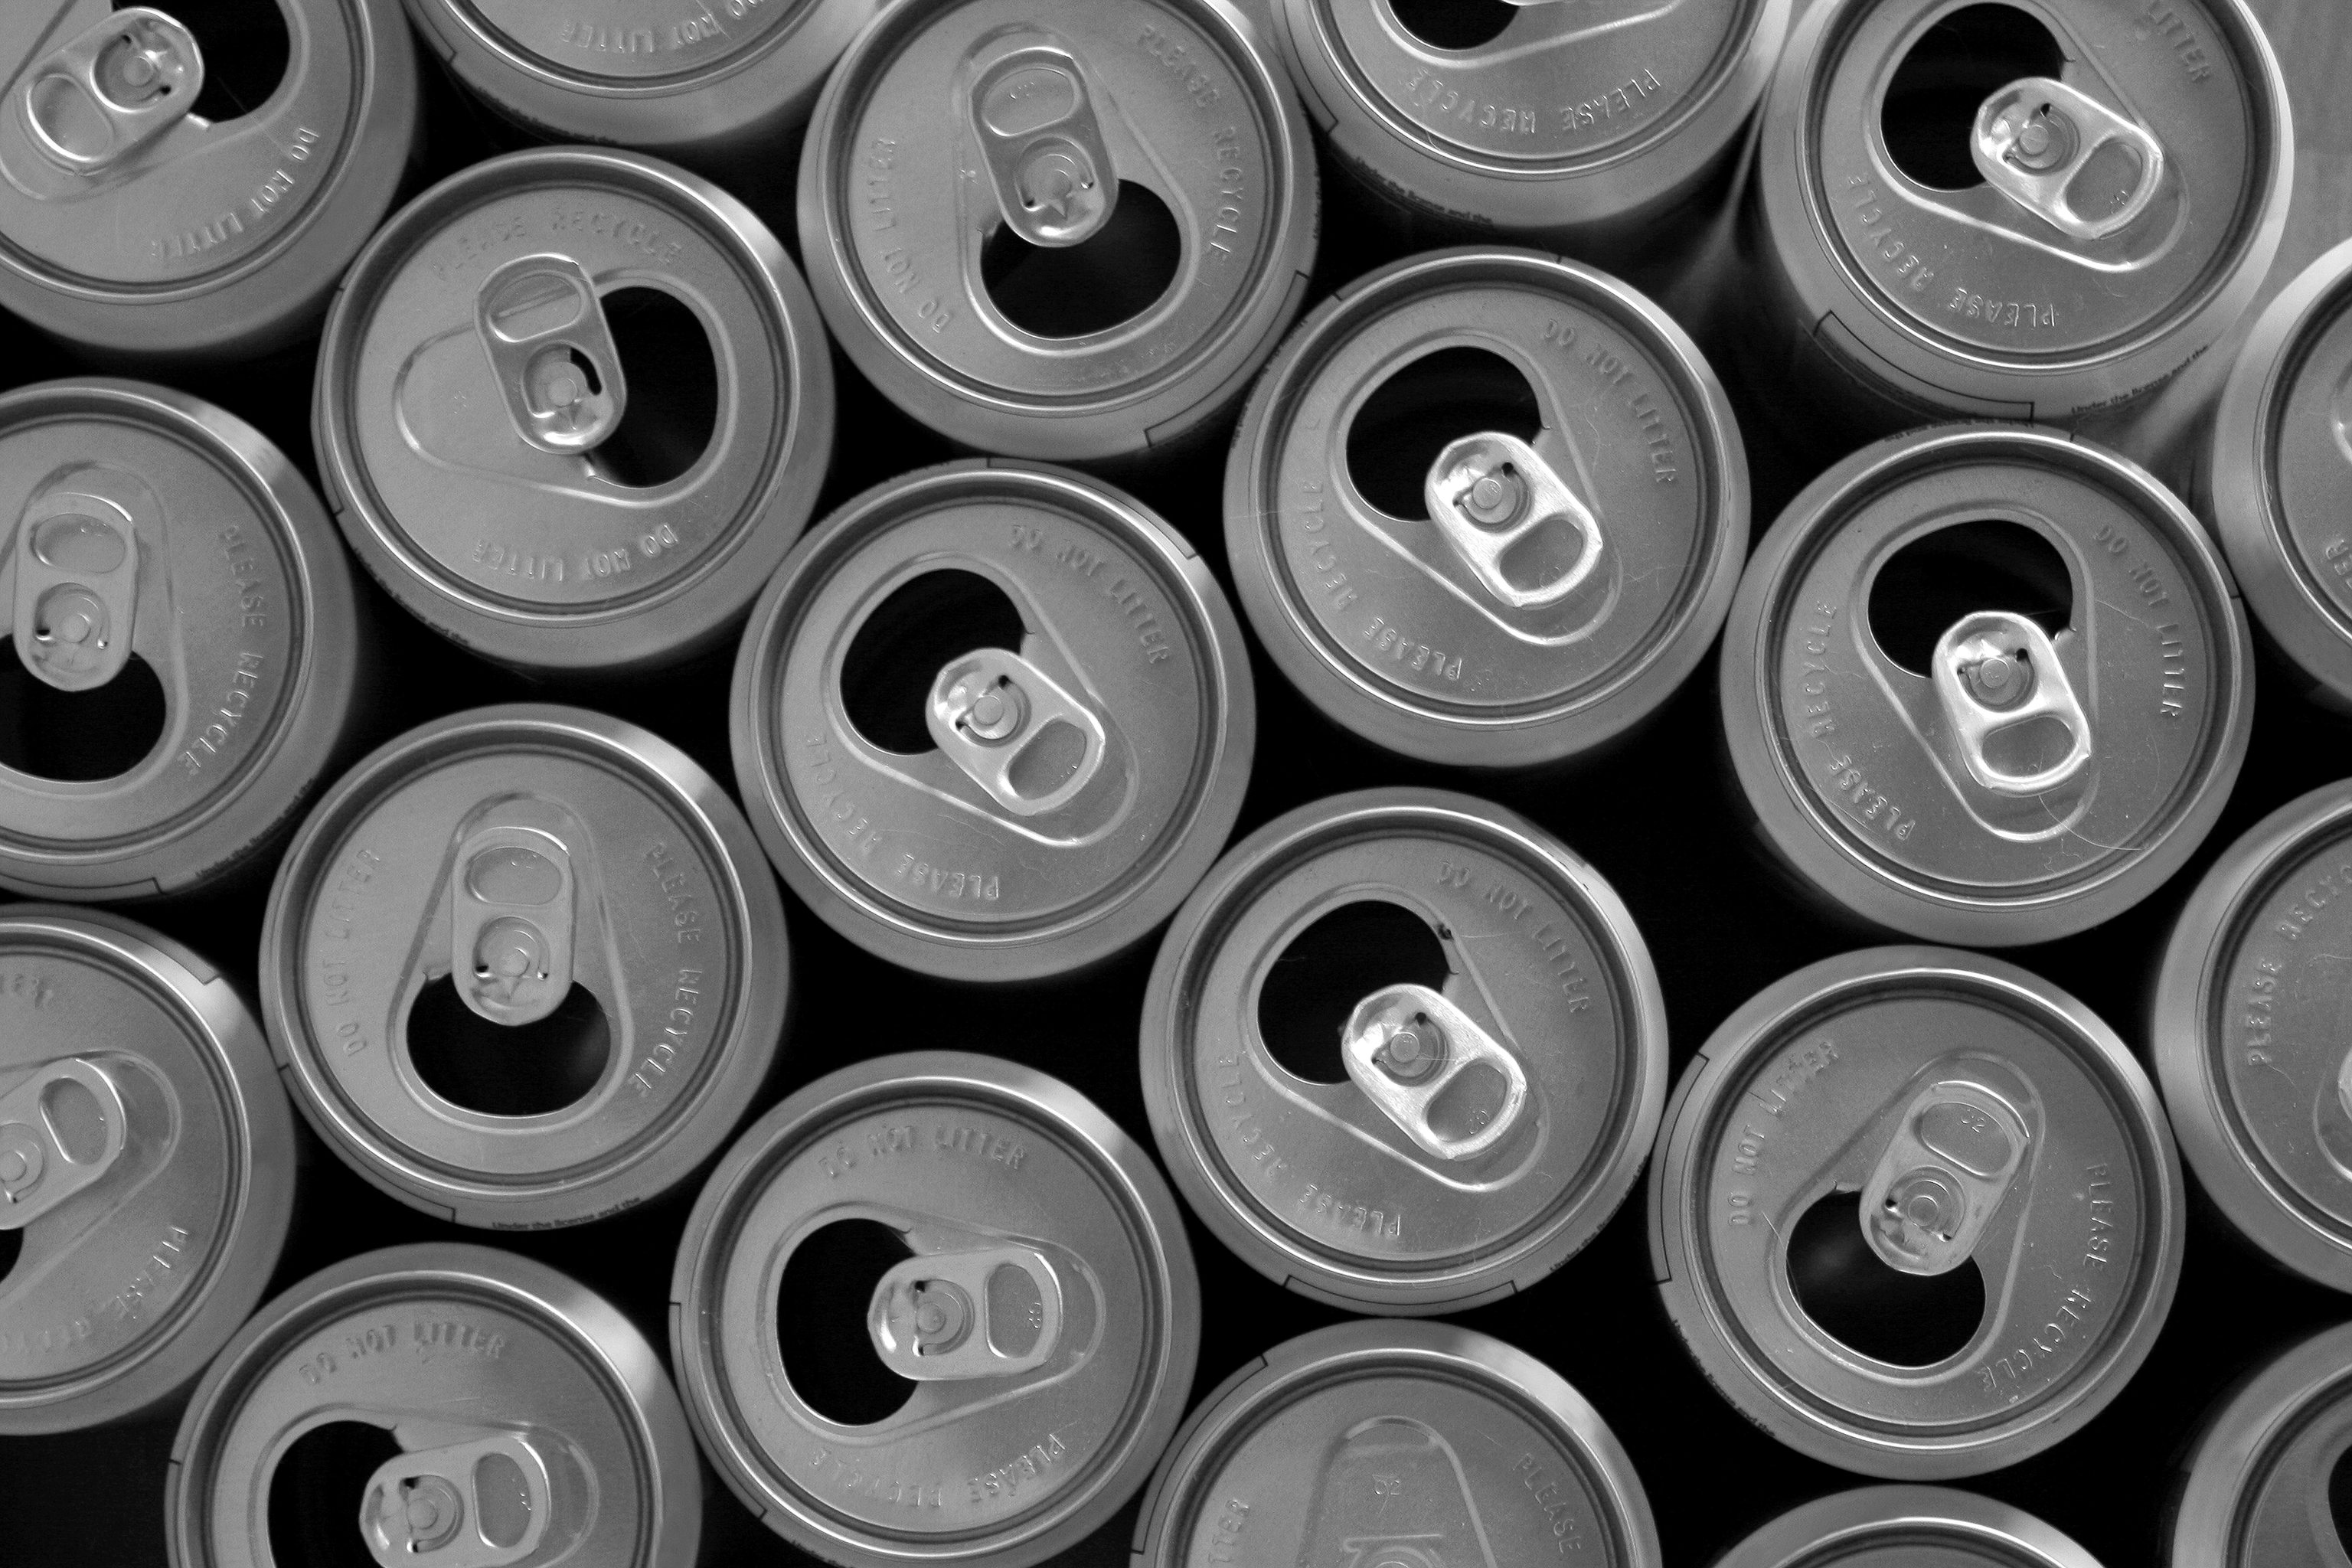 Bisphenol A can be found in some cans of food and soft drinks.